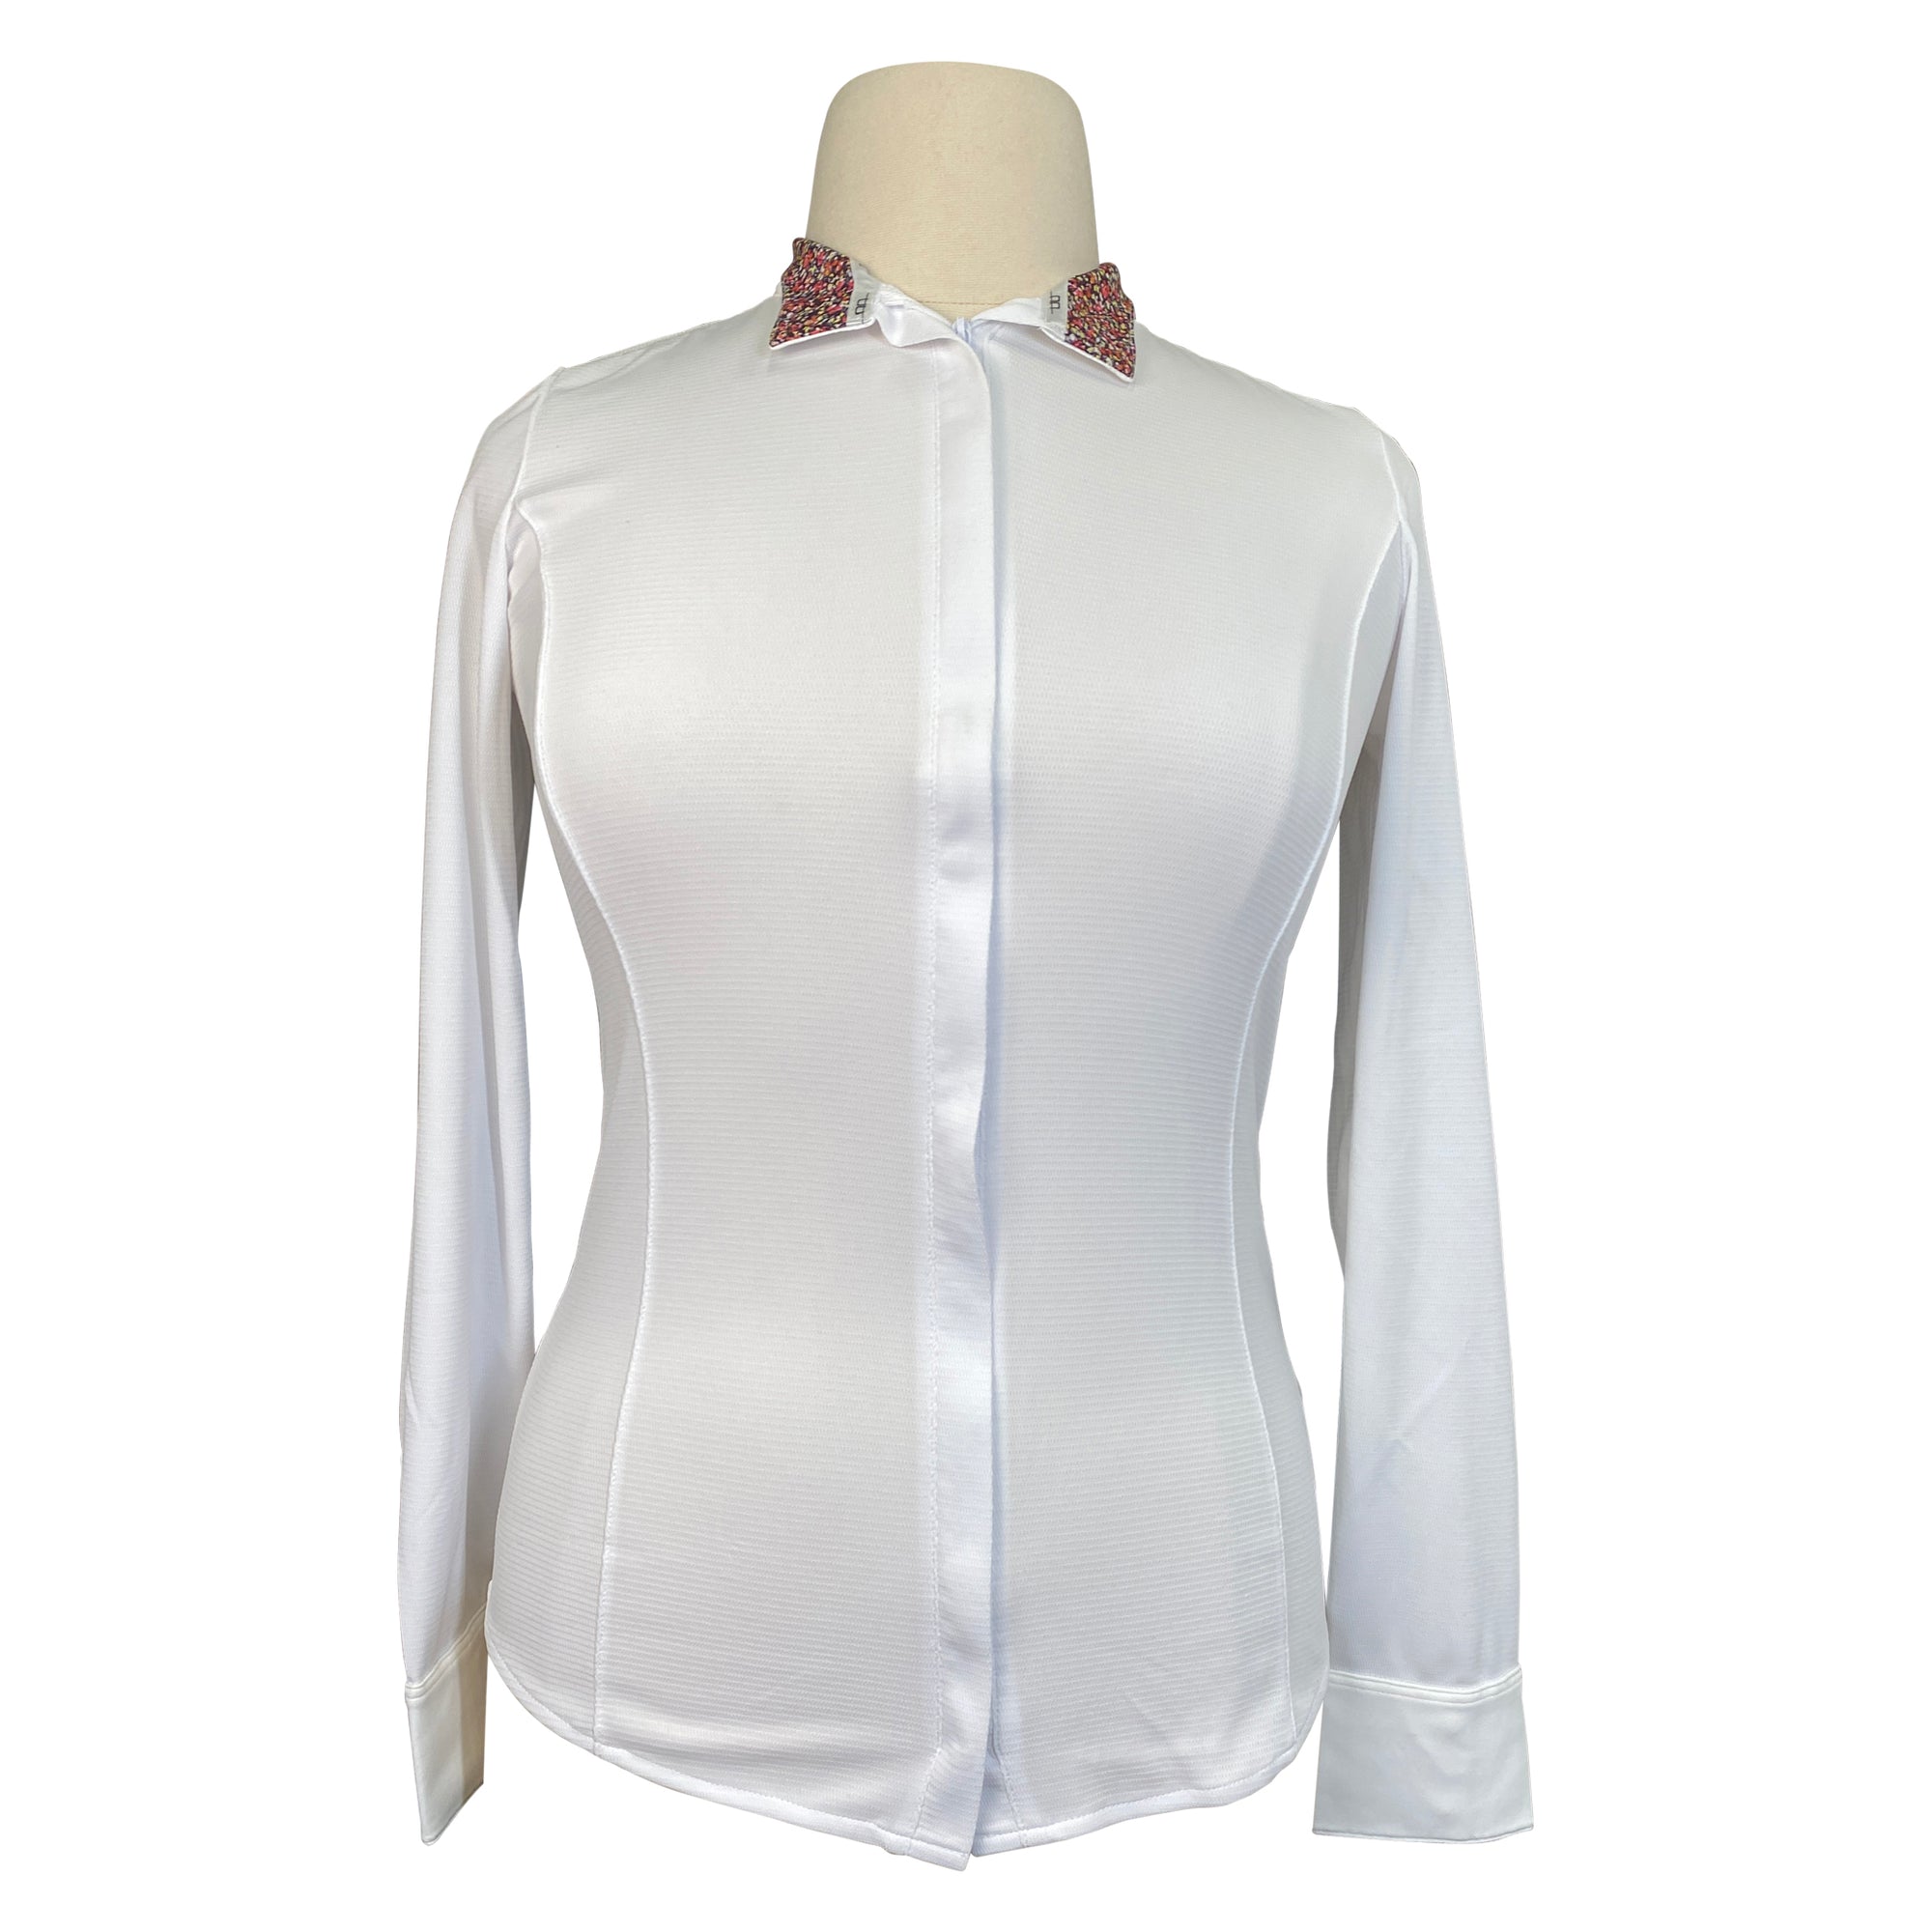 Horseware 'Liberty' Limited Edition Show Shirt in White